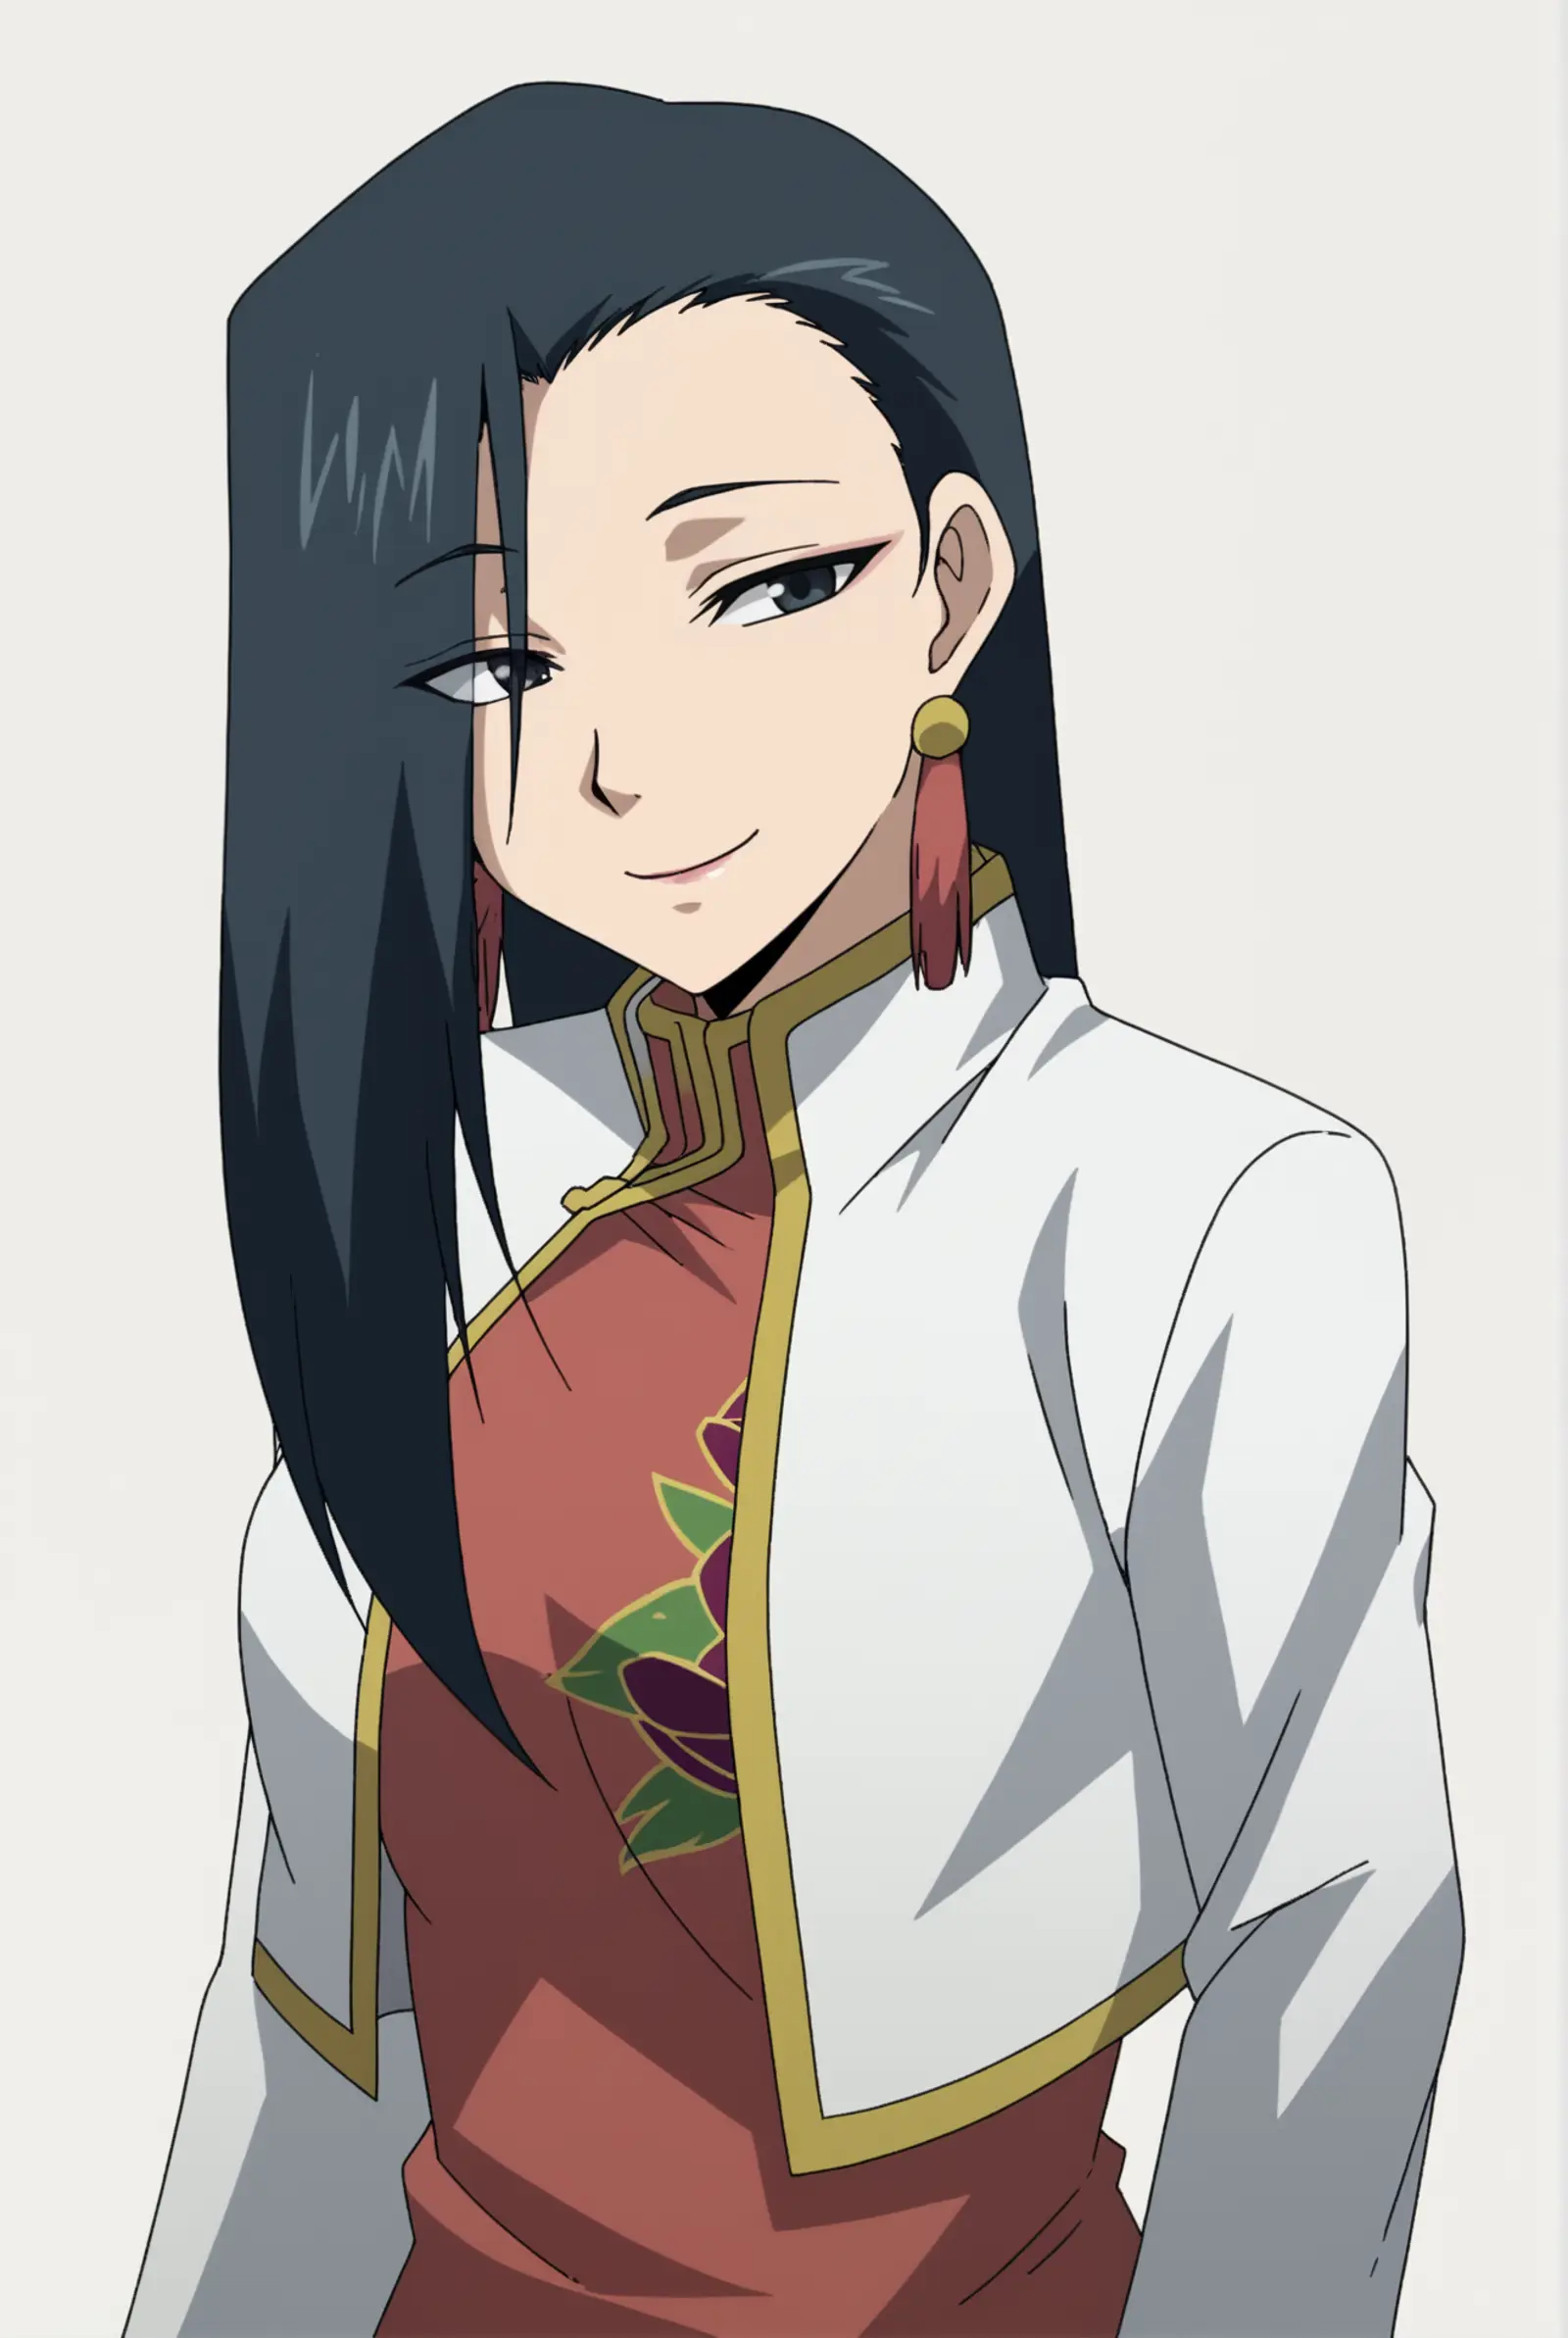 A woman with long, dark hair and striking red earrings. She is dressed in a white jacket with gold trim, which is worn over a red top with a floral design. Her gaze is directed off to the side, and she wears a slight smile. 